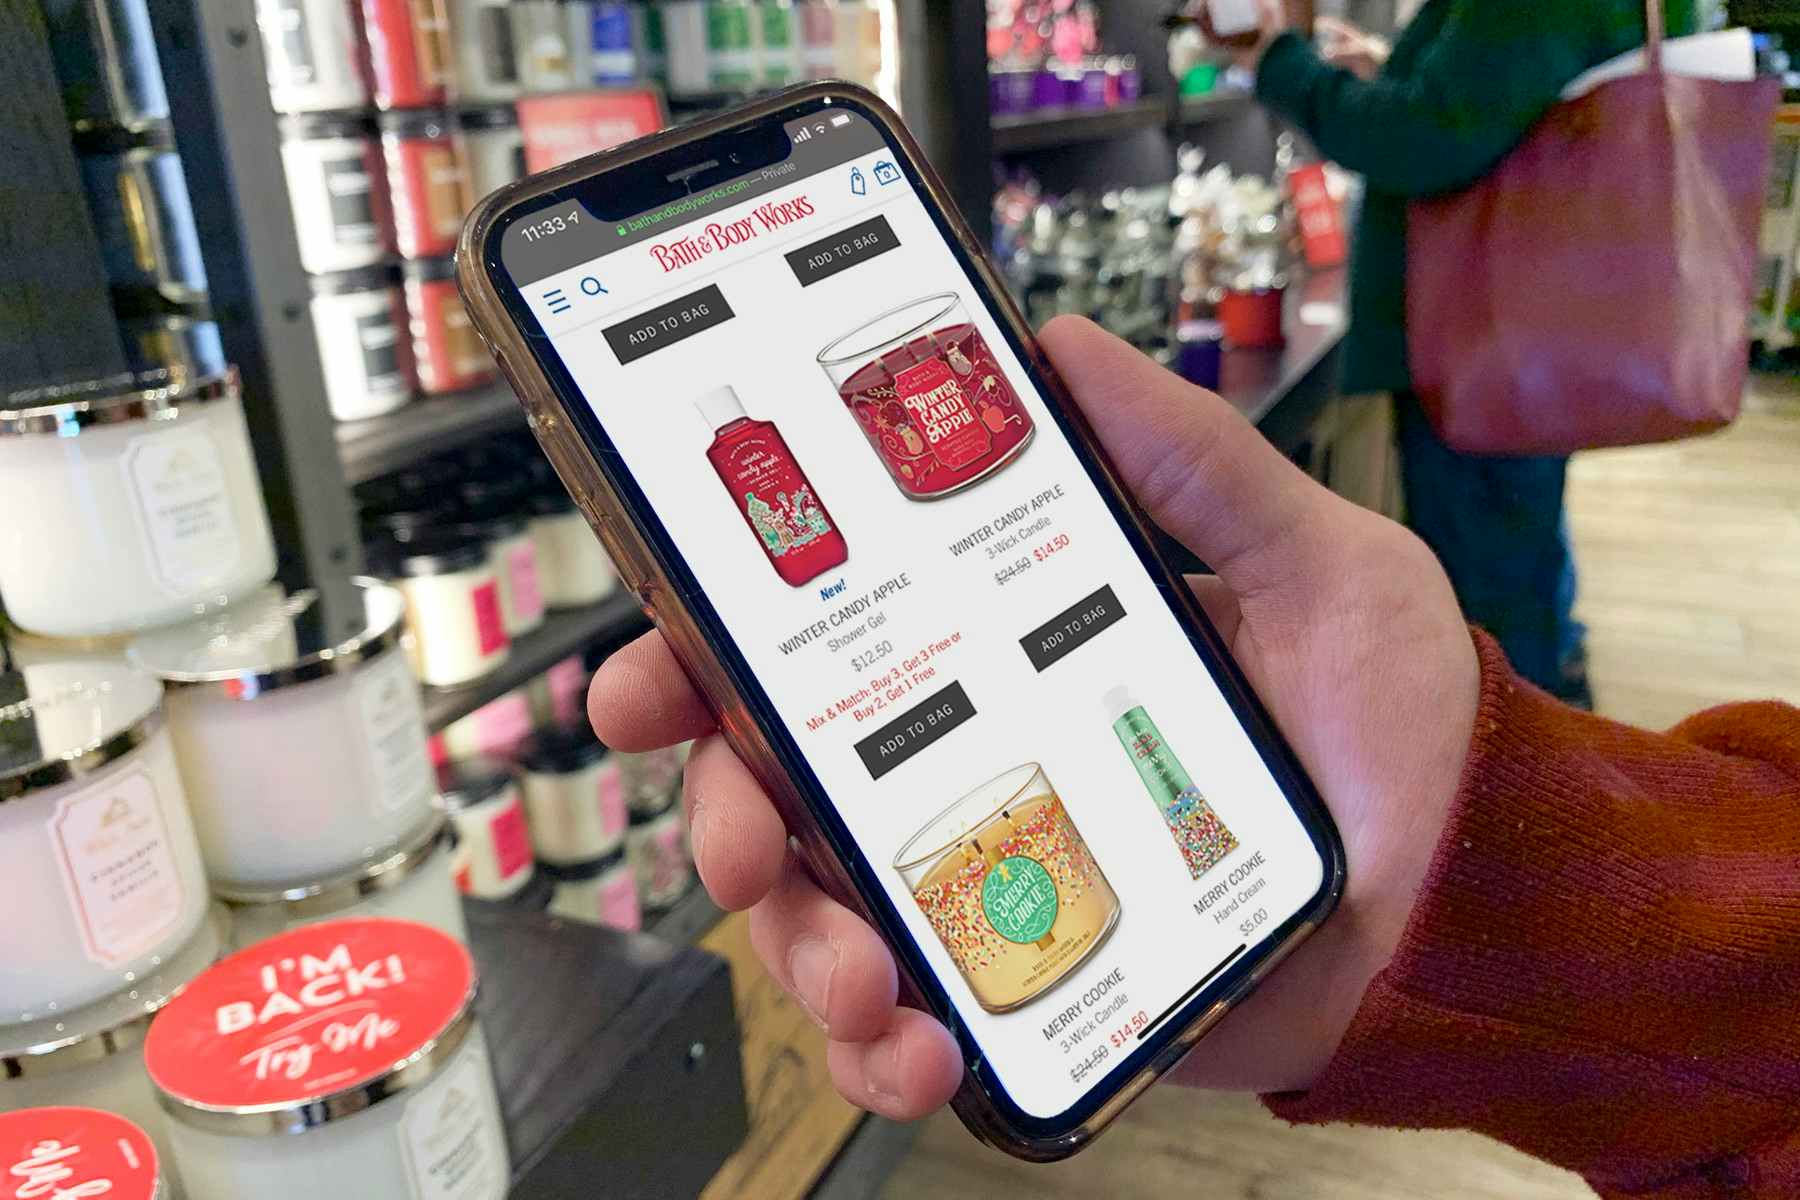 Bath & Body Works website on a smartphone showing marked down items.